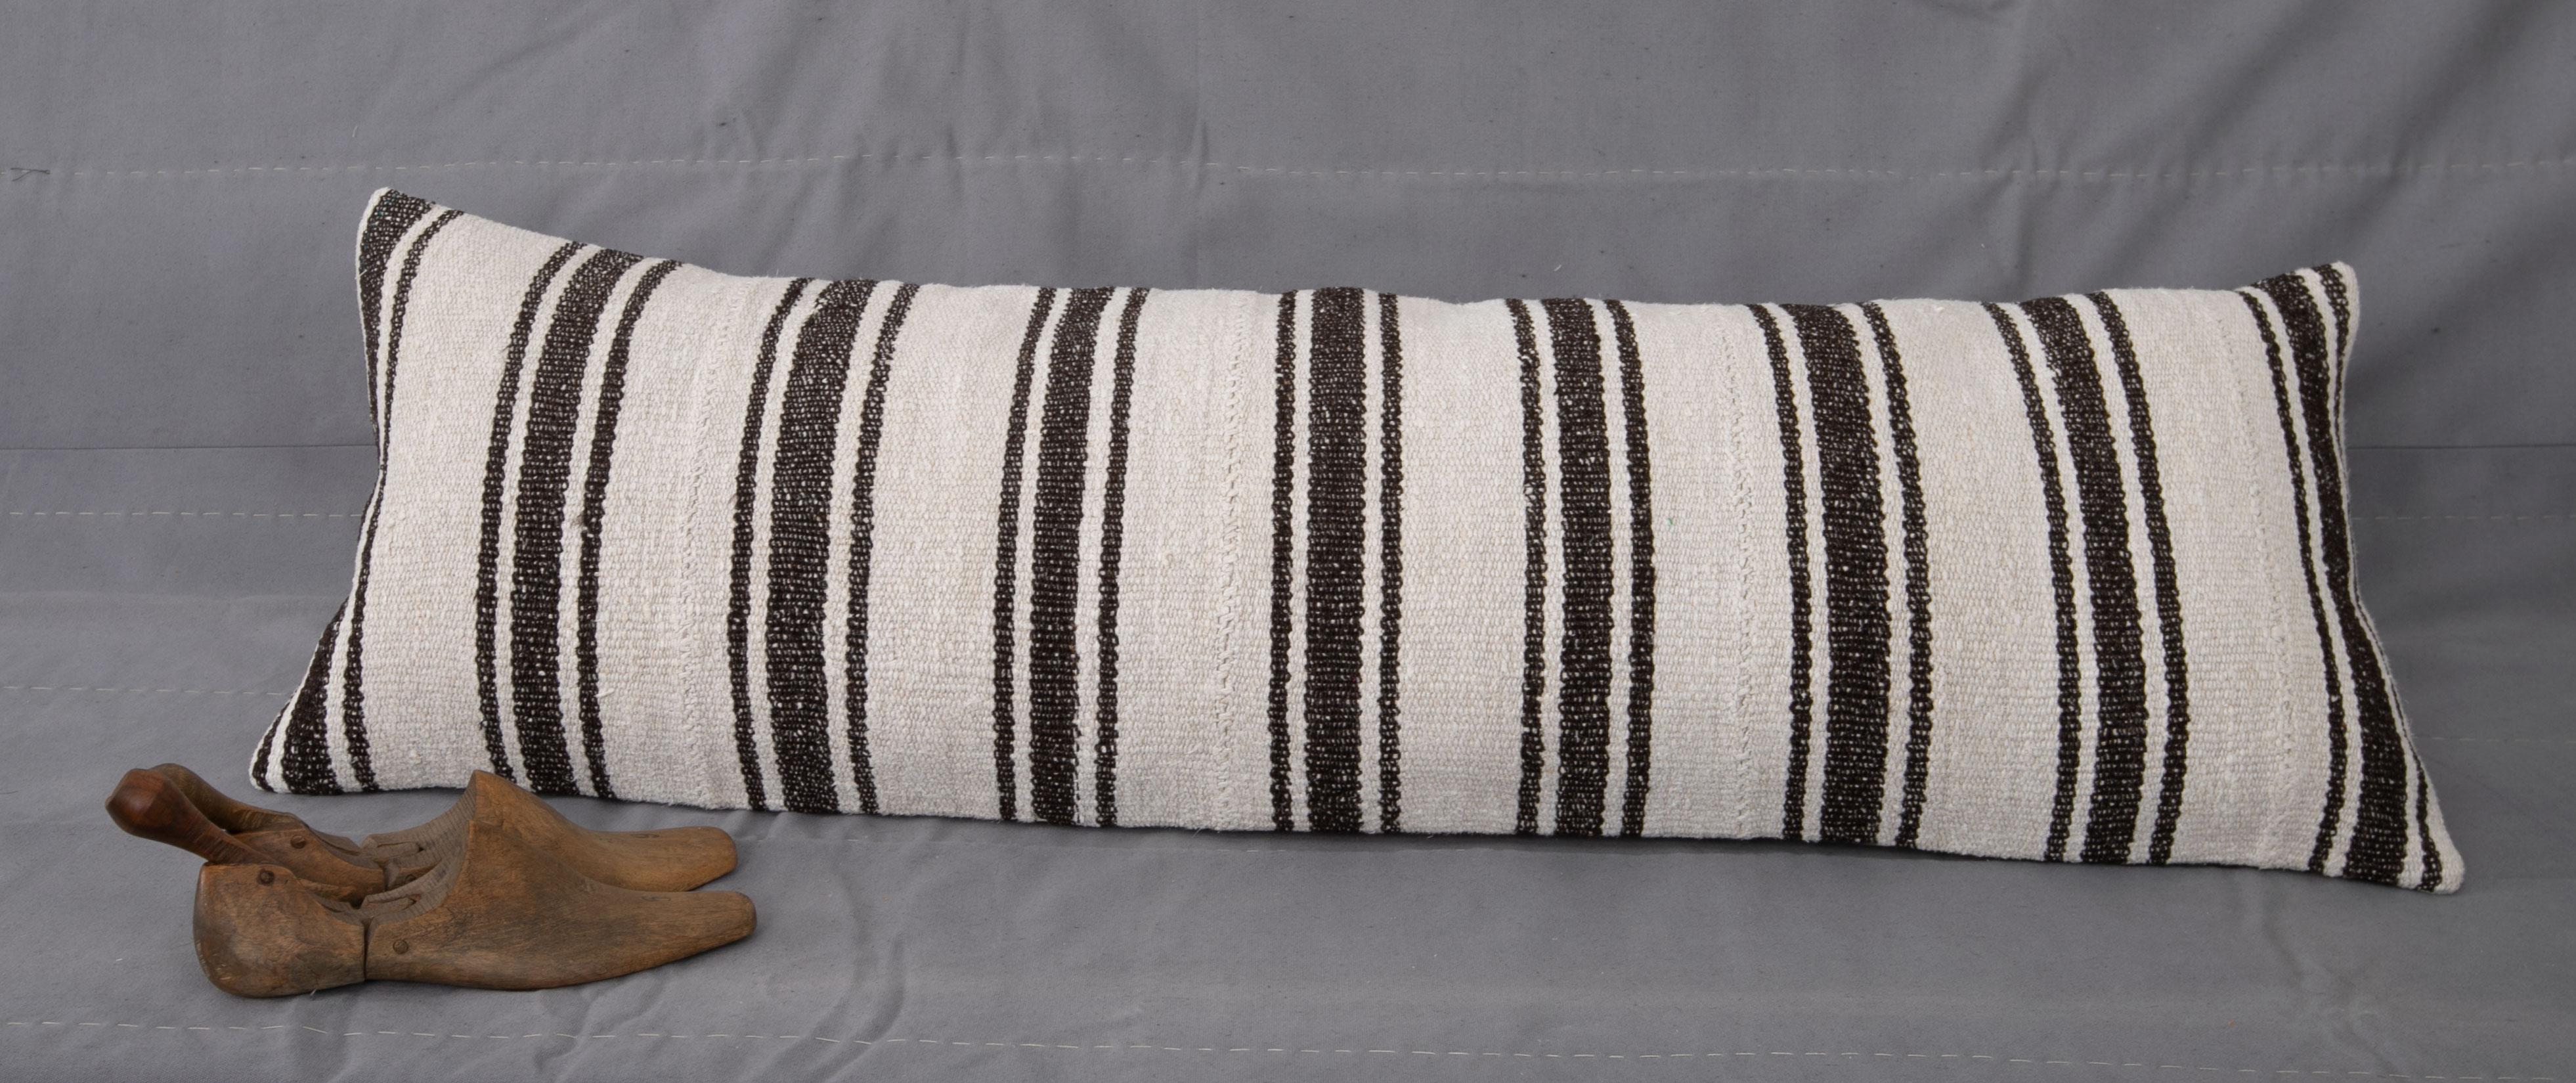 XXL Lumbar Made from Vintage Anatolian Hemp and Goat Hair Kilims, Mid 20th C. In Good Condition For Sale In Istanbul, TR